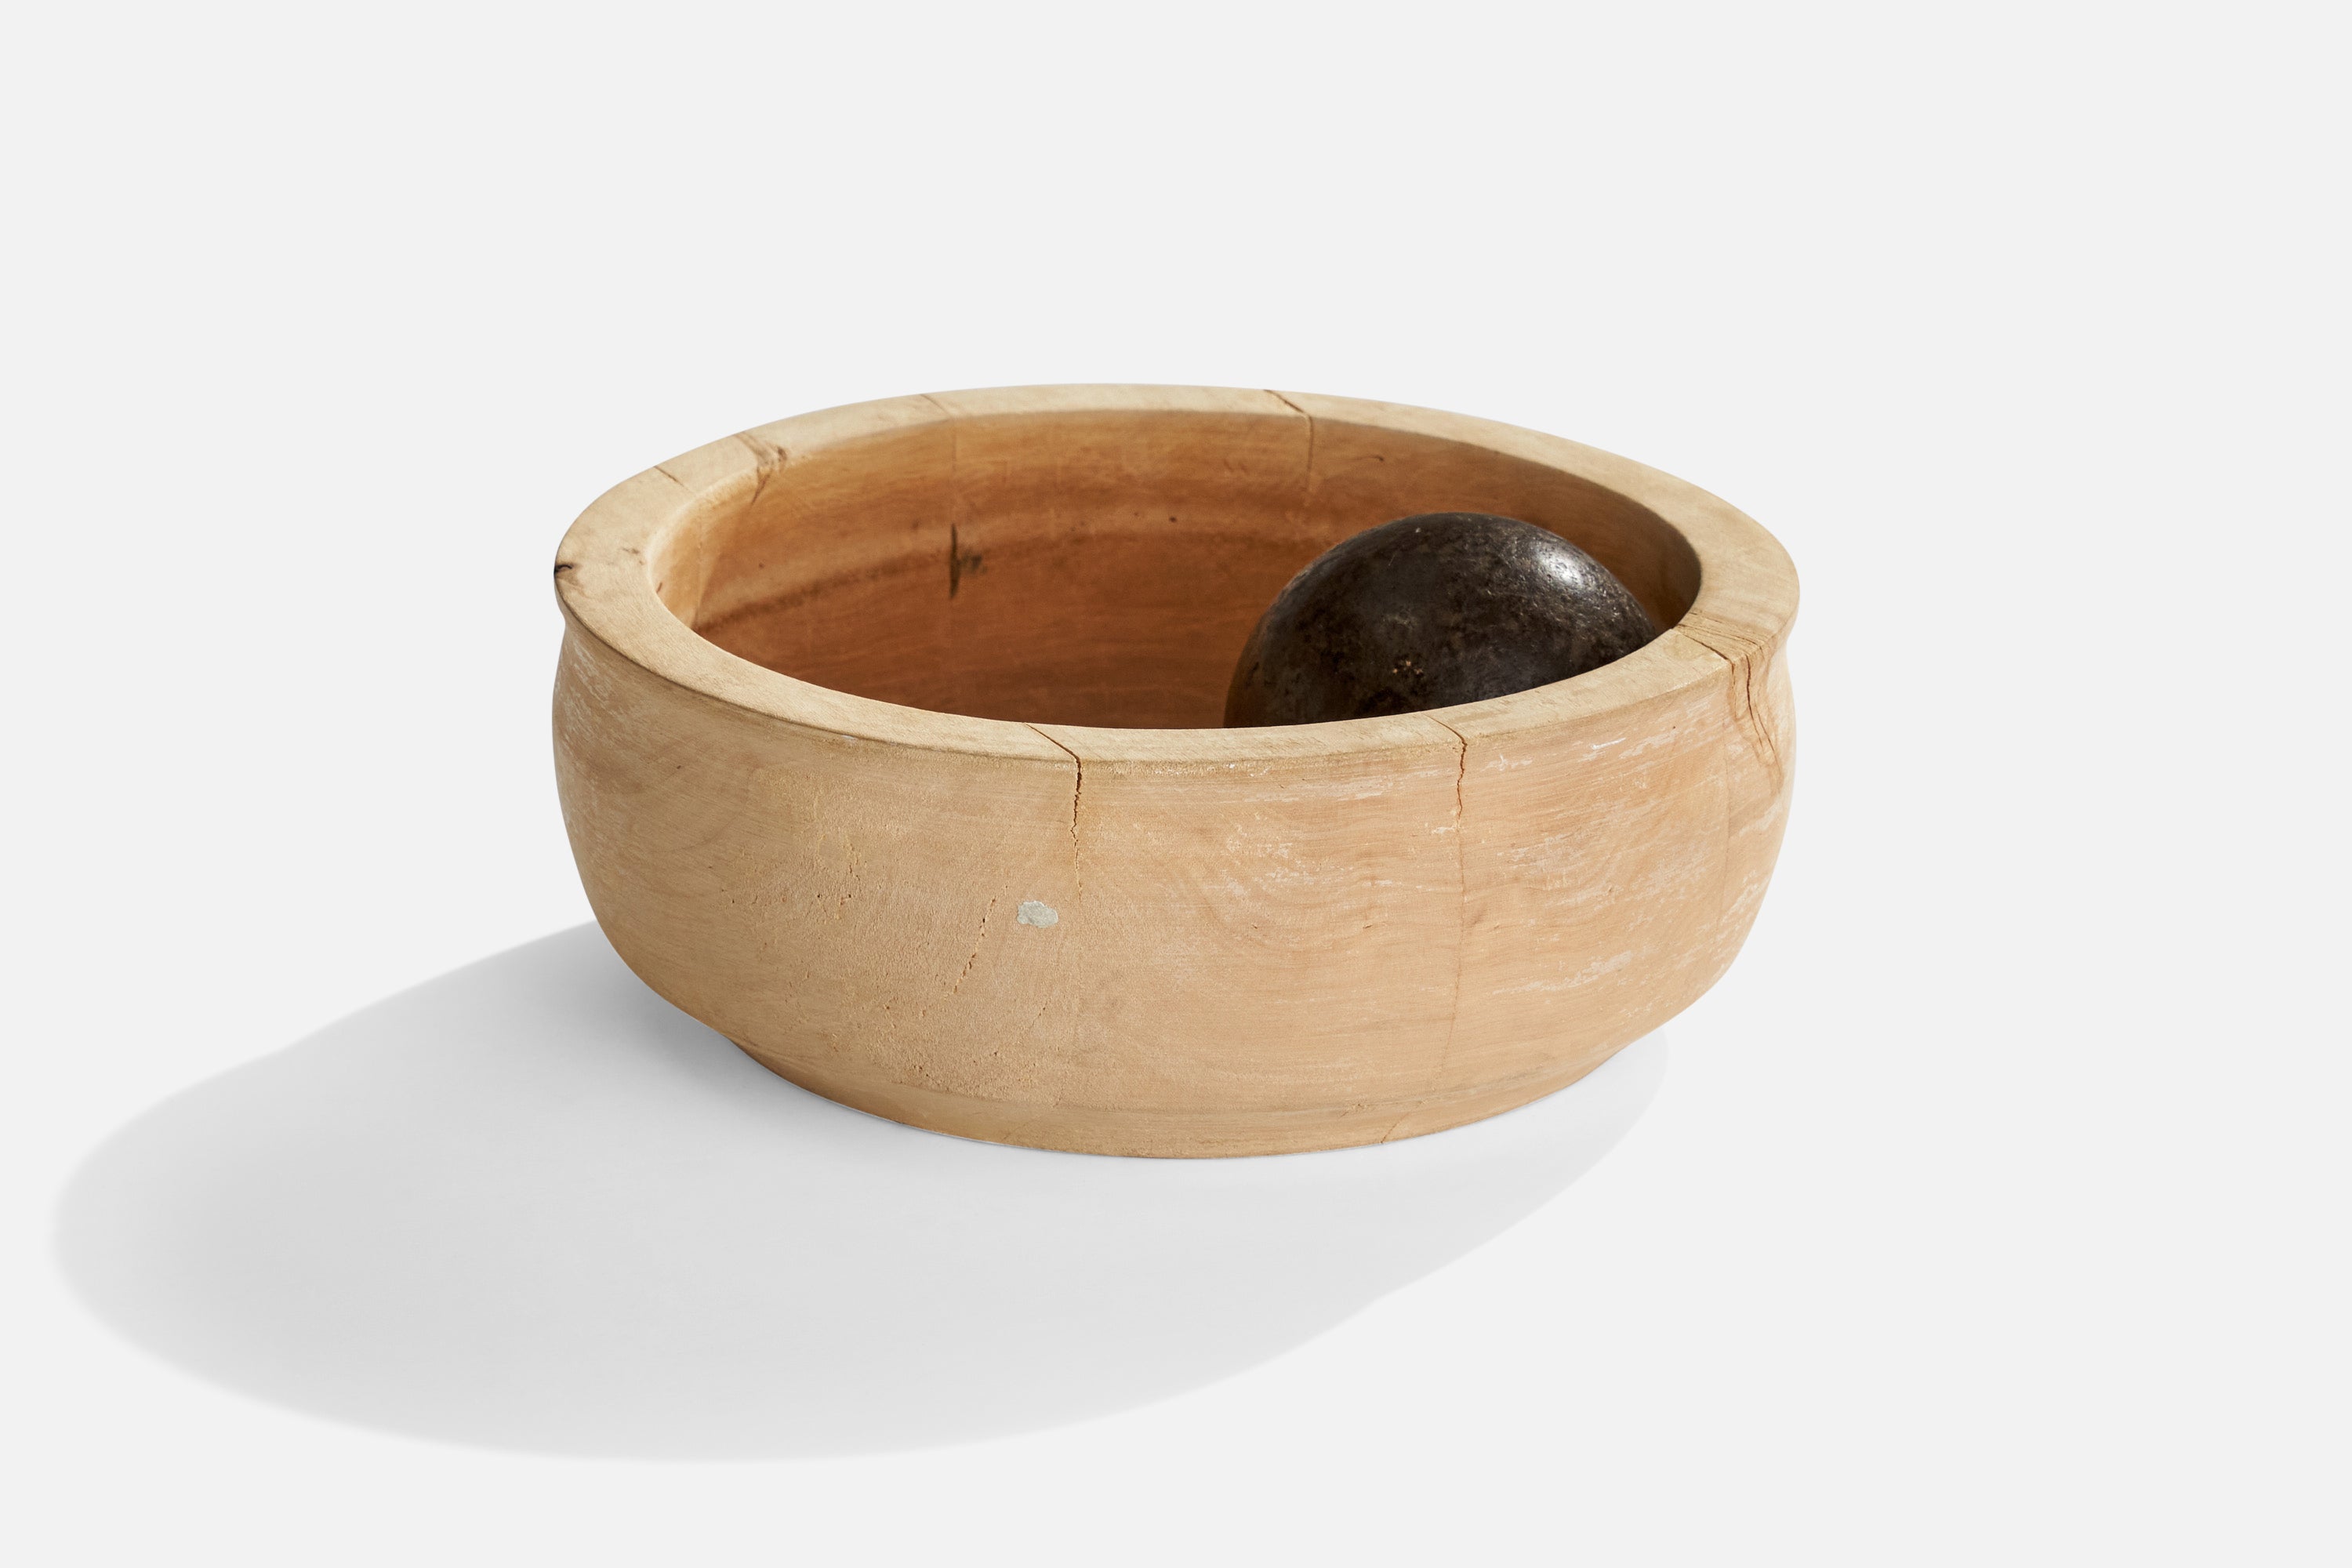 An ash and iron grinding bowl designed and produced in Sweden, c. 1960s.